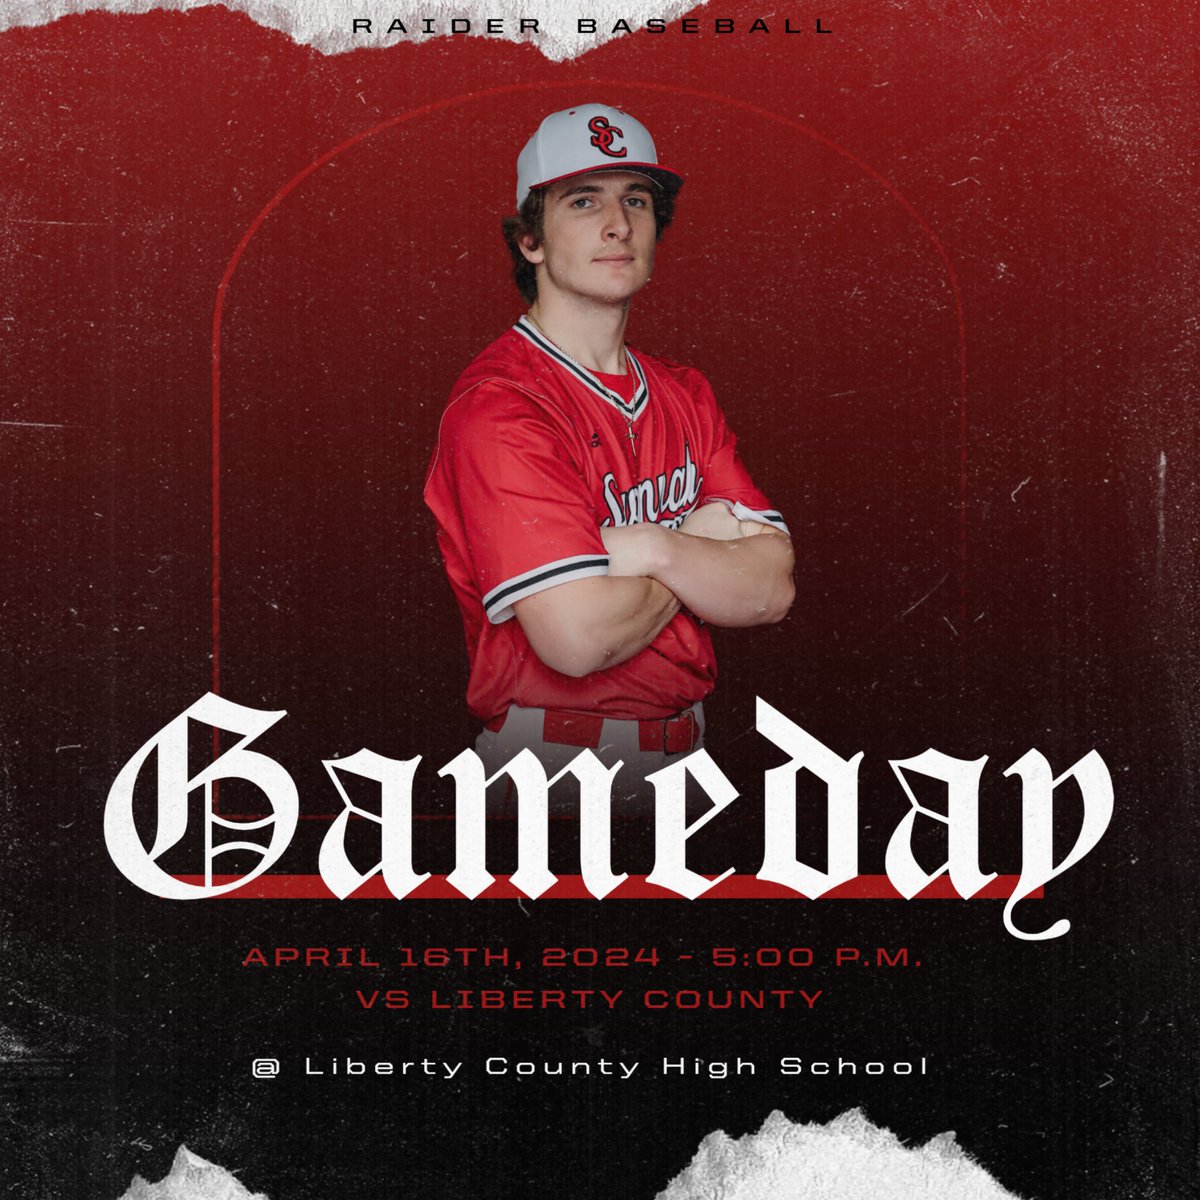 Good luck to the Raider Baseball team as they travel to take on Liberty County tonight!